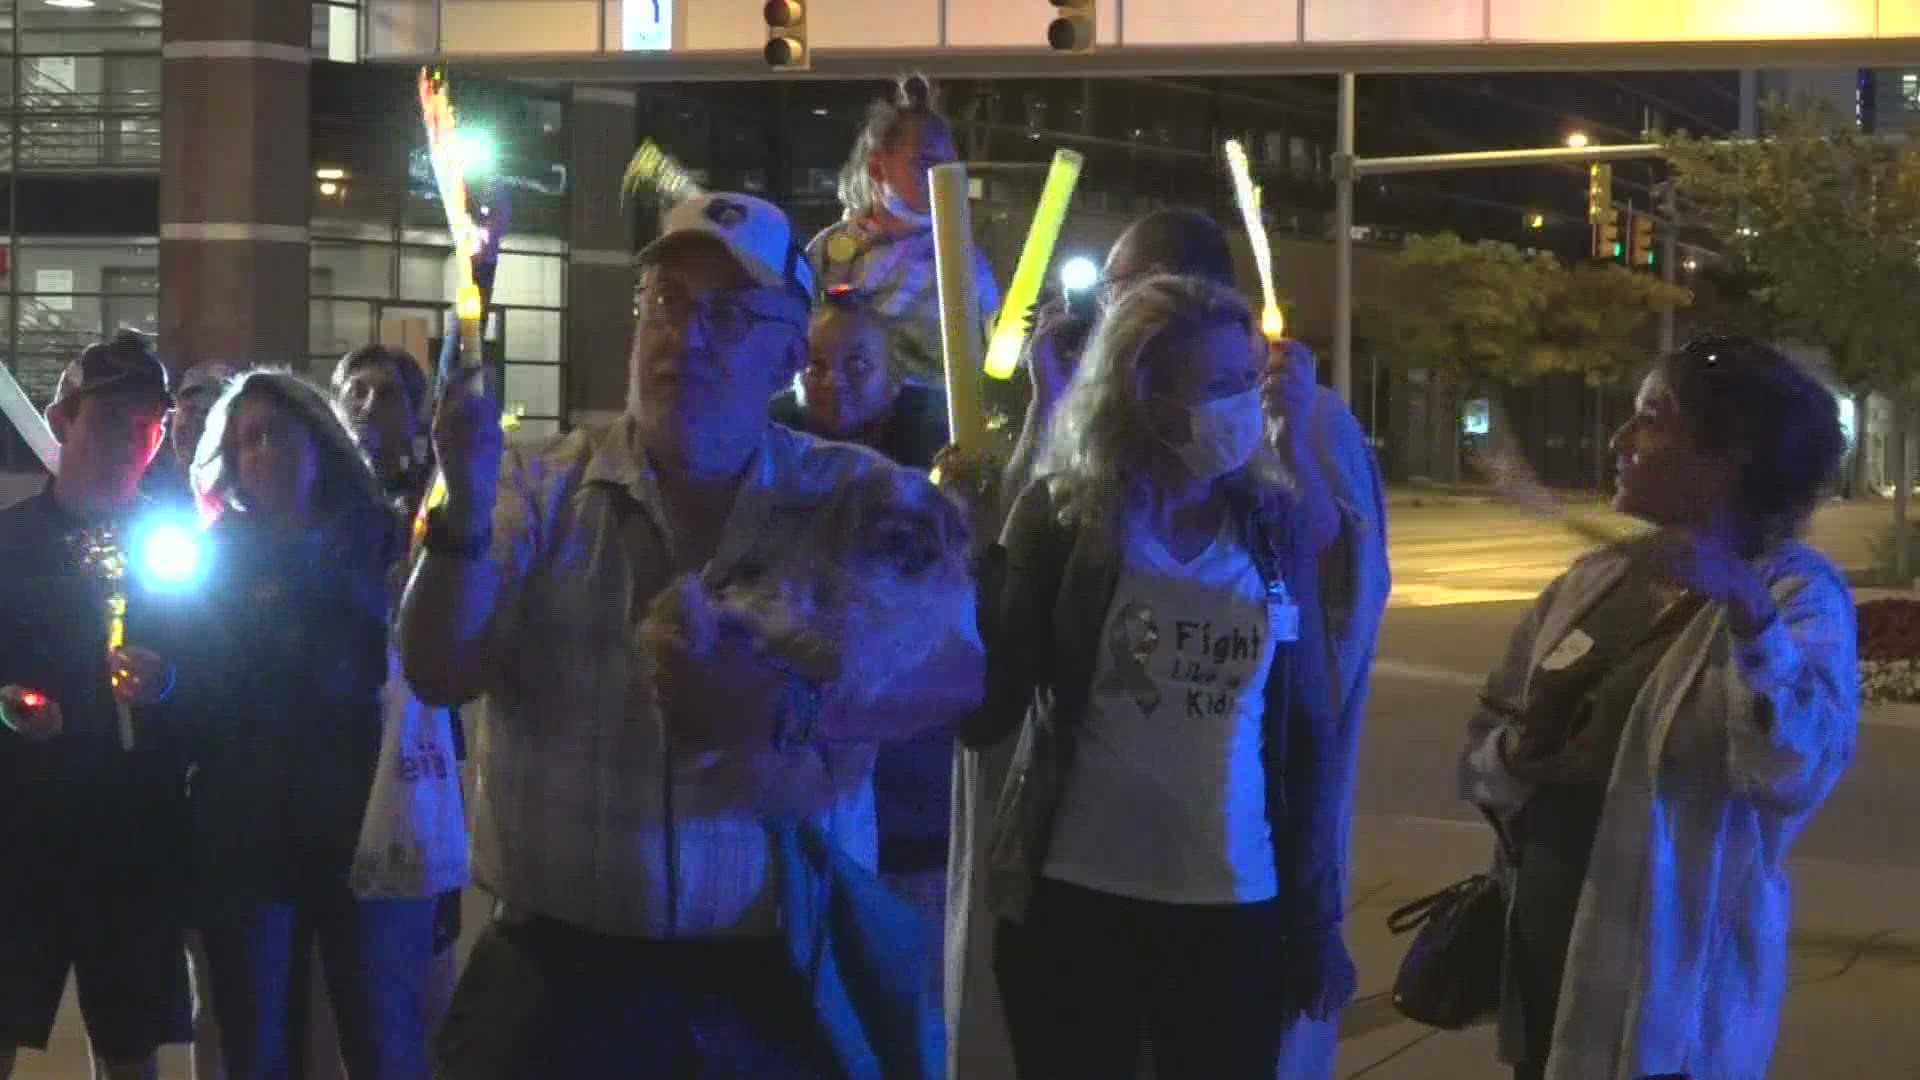 Crowds gathered in support outside of Helen DeVos Children's Hospital, holding gold glow sticks.